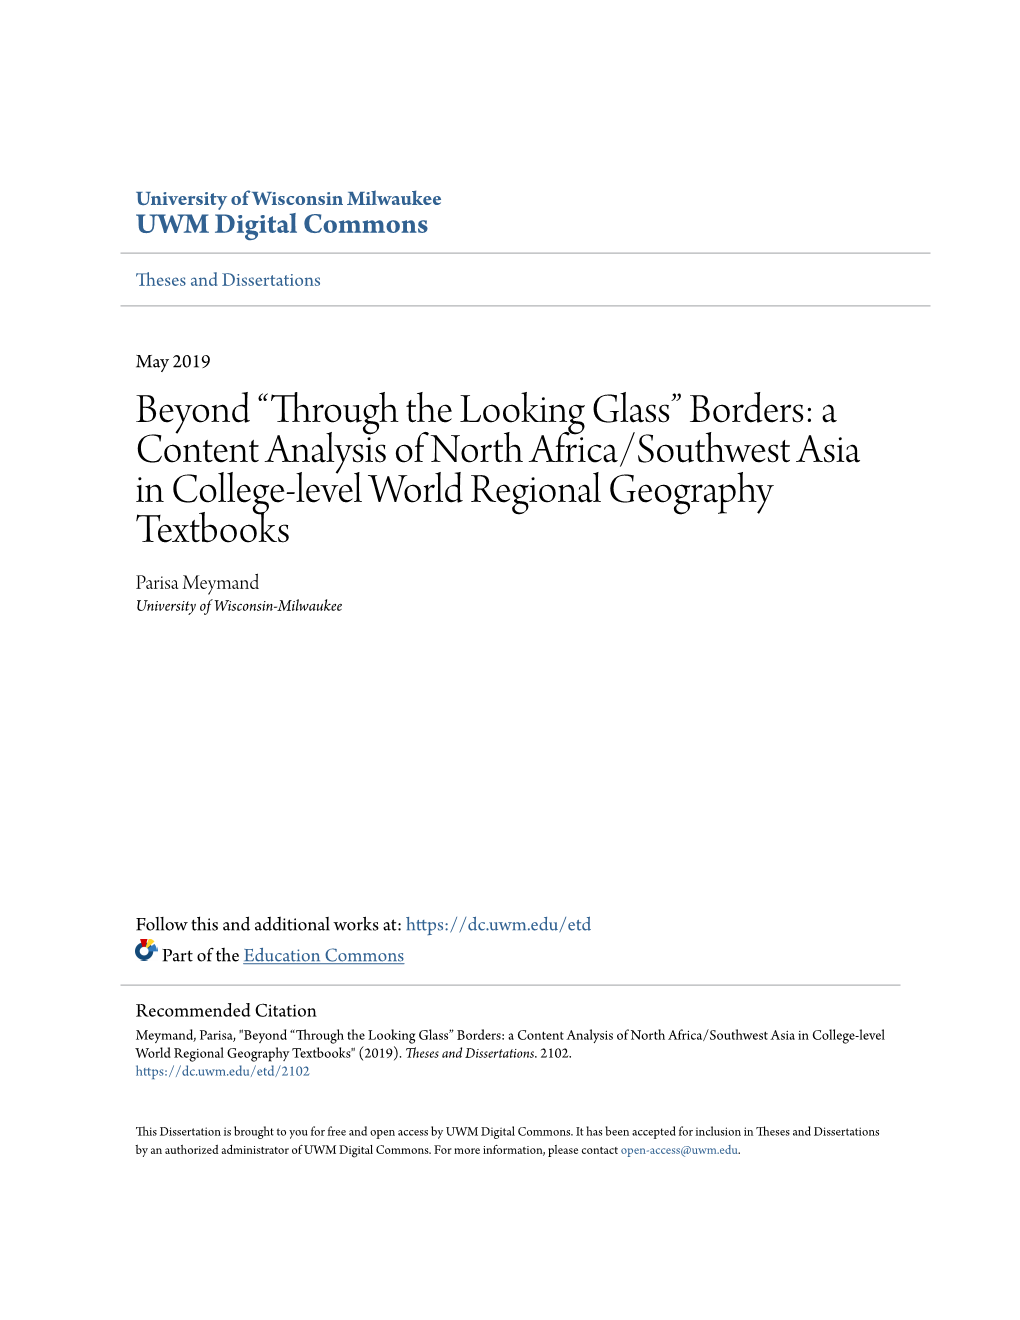 Borders: a Content Analysis of North Africa/Southwest Asia in College-Level World Regional Geography Textbooks Parisa Meymand University of Wisconsin-Milwaukee